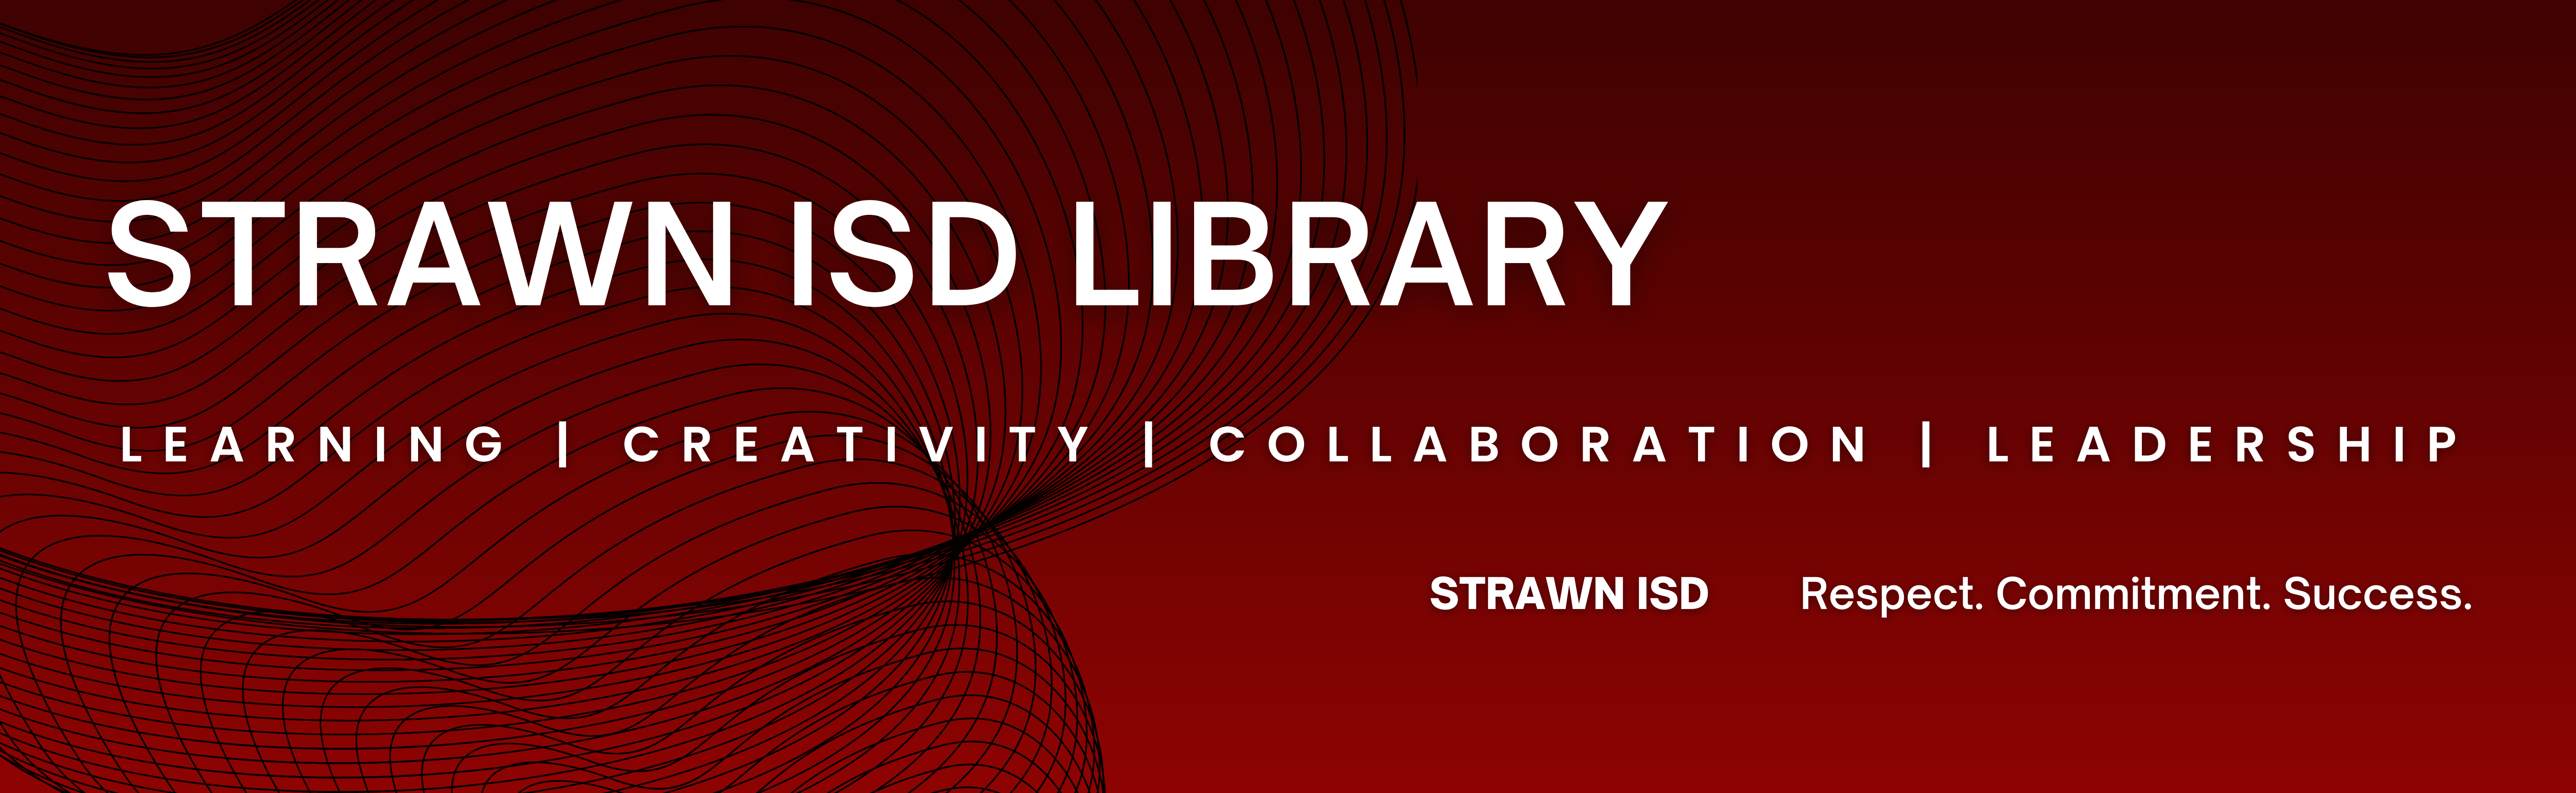 Strawn ISD Library Learning | Creativity | Collaboration | Leadership Strawn ISD Respect. Commitment. Success.